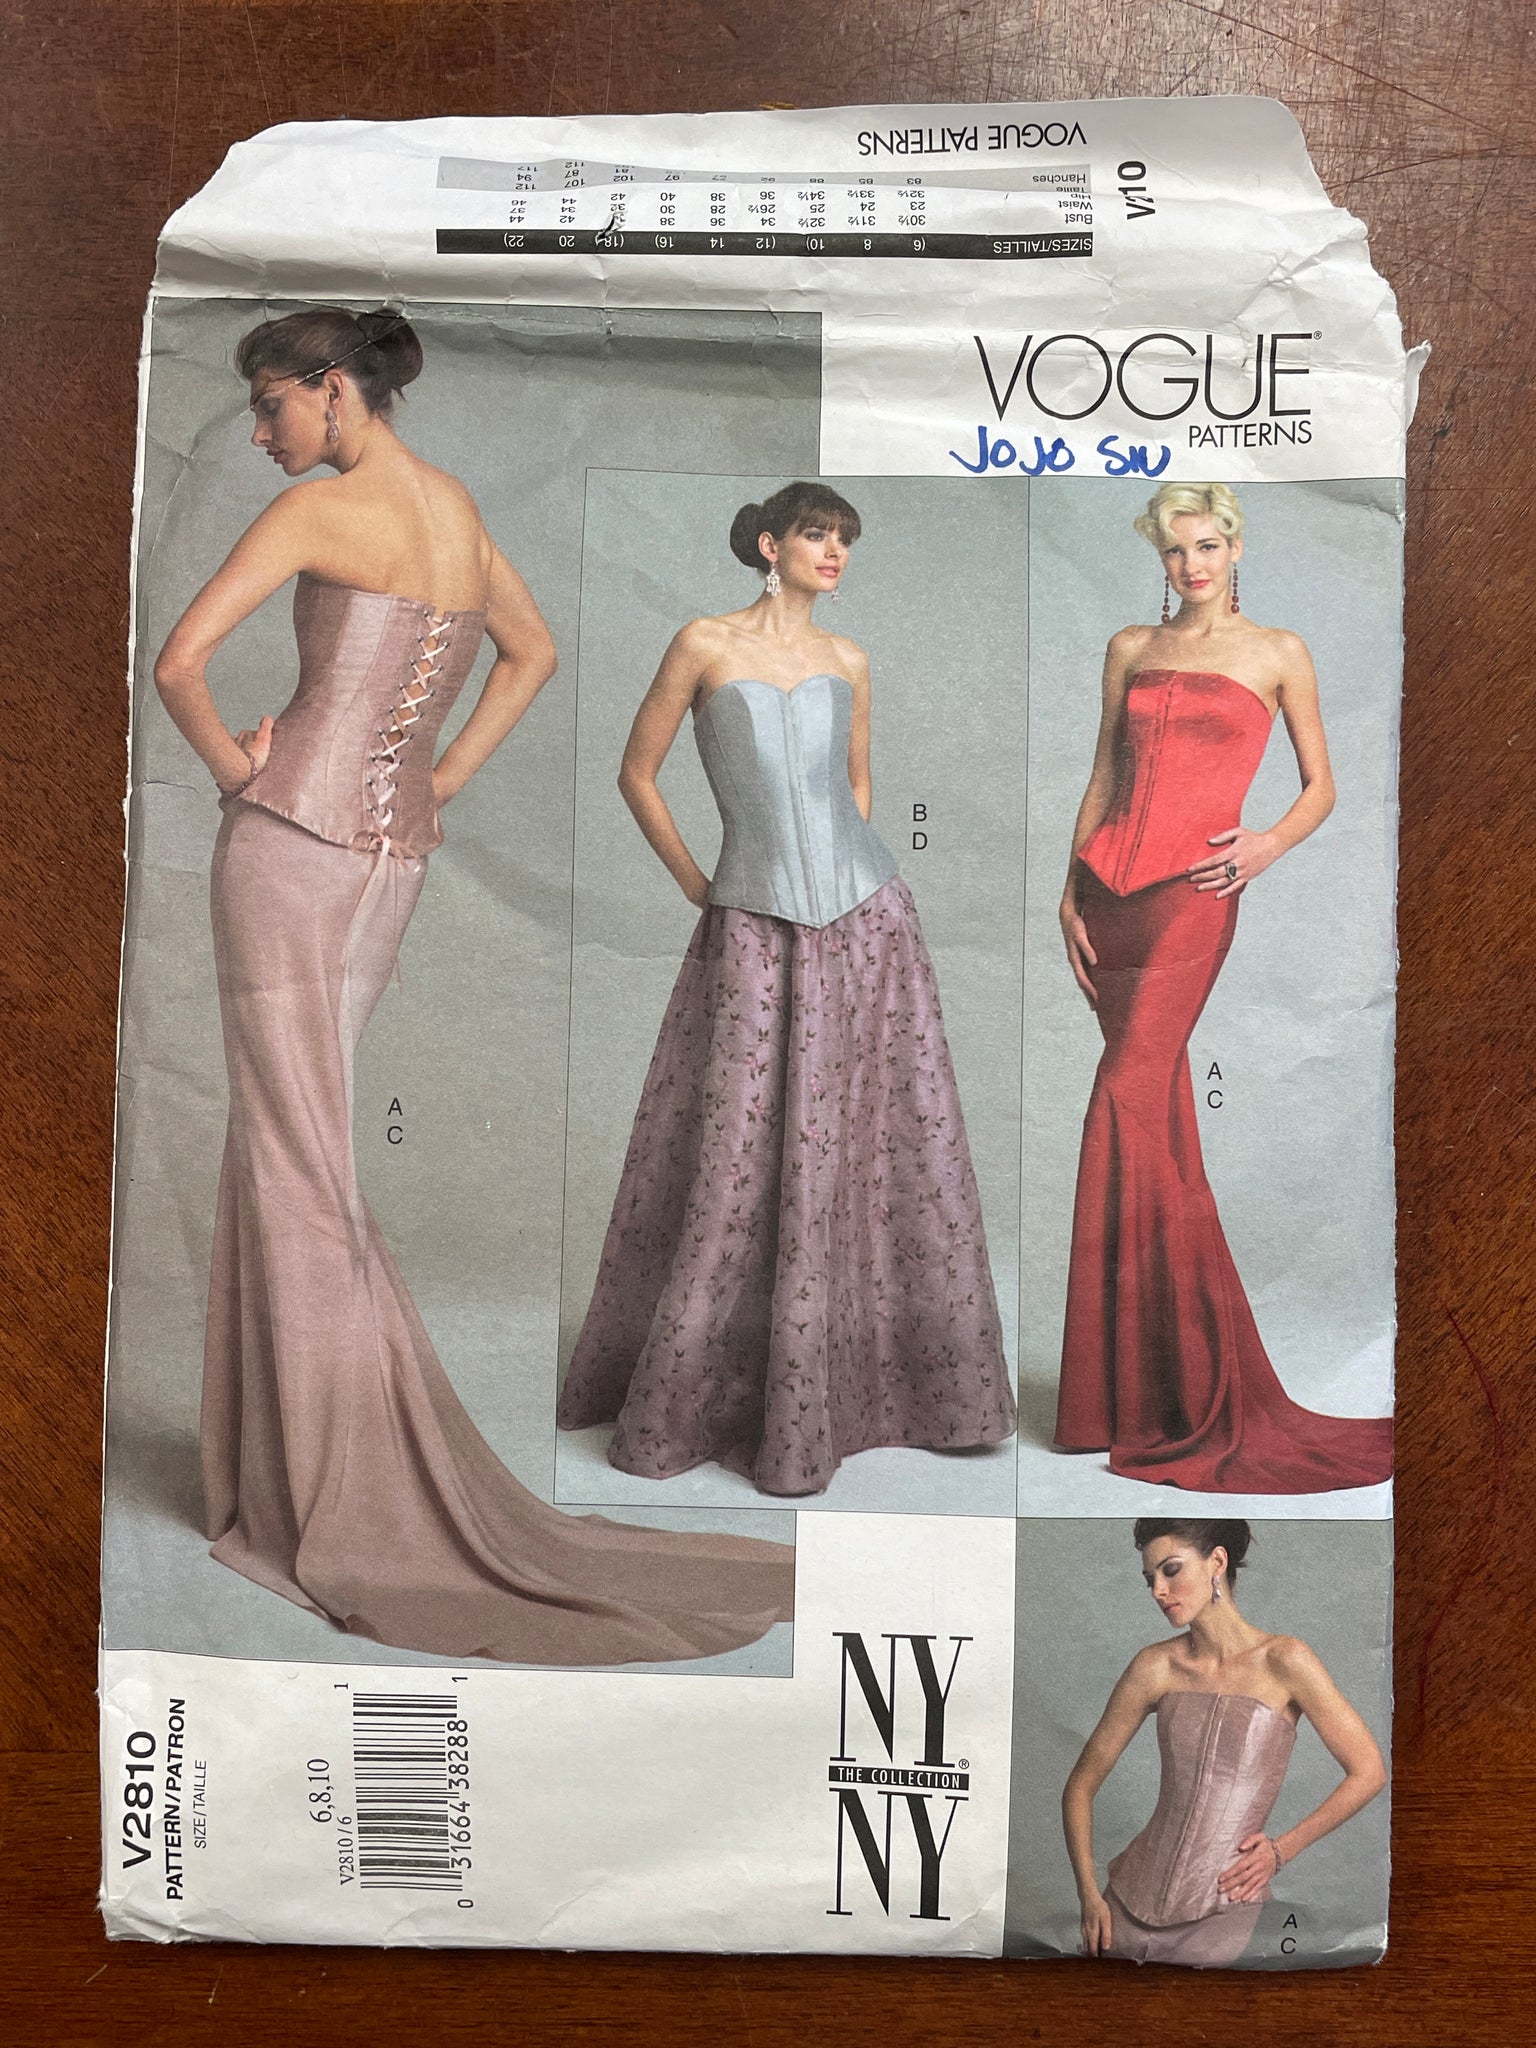 2003 Vogue 2810 Pattern - Boned Bodice and Skirt FACTORY FOLDED